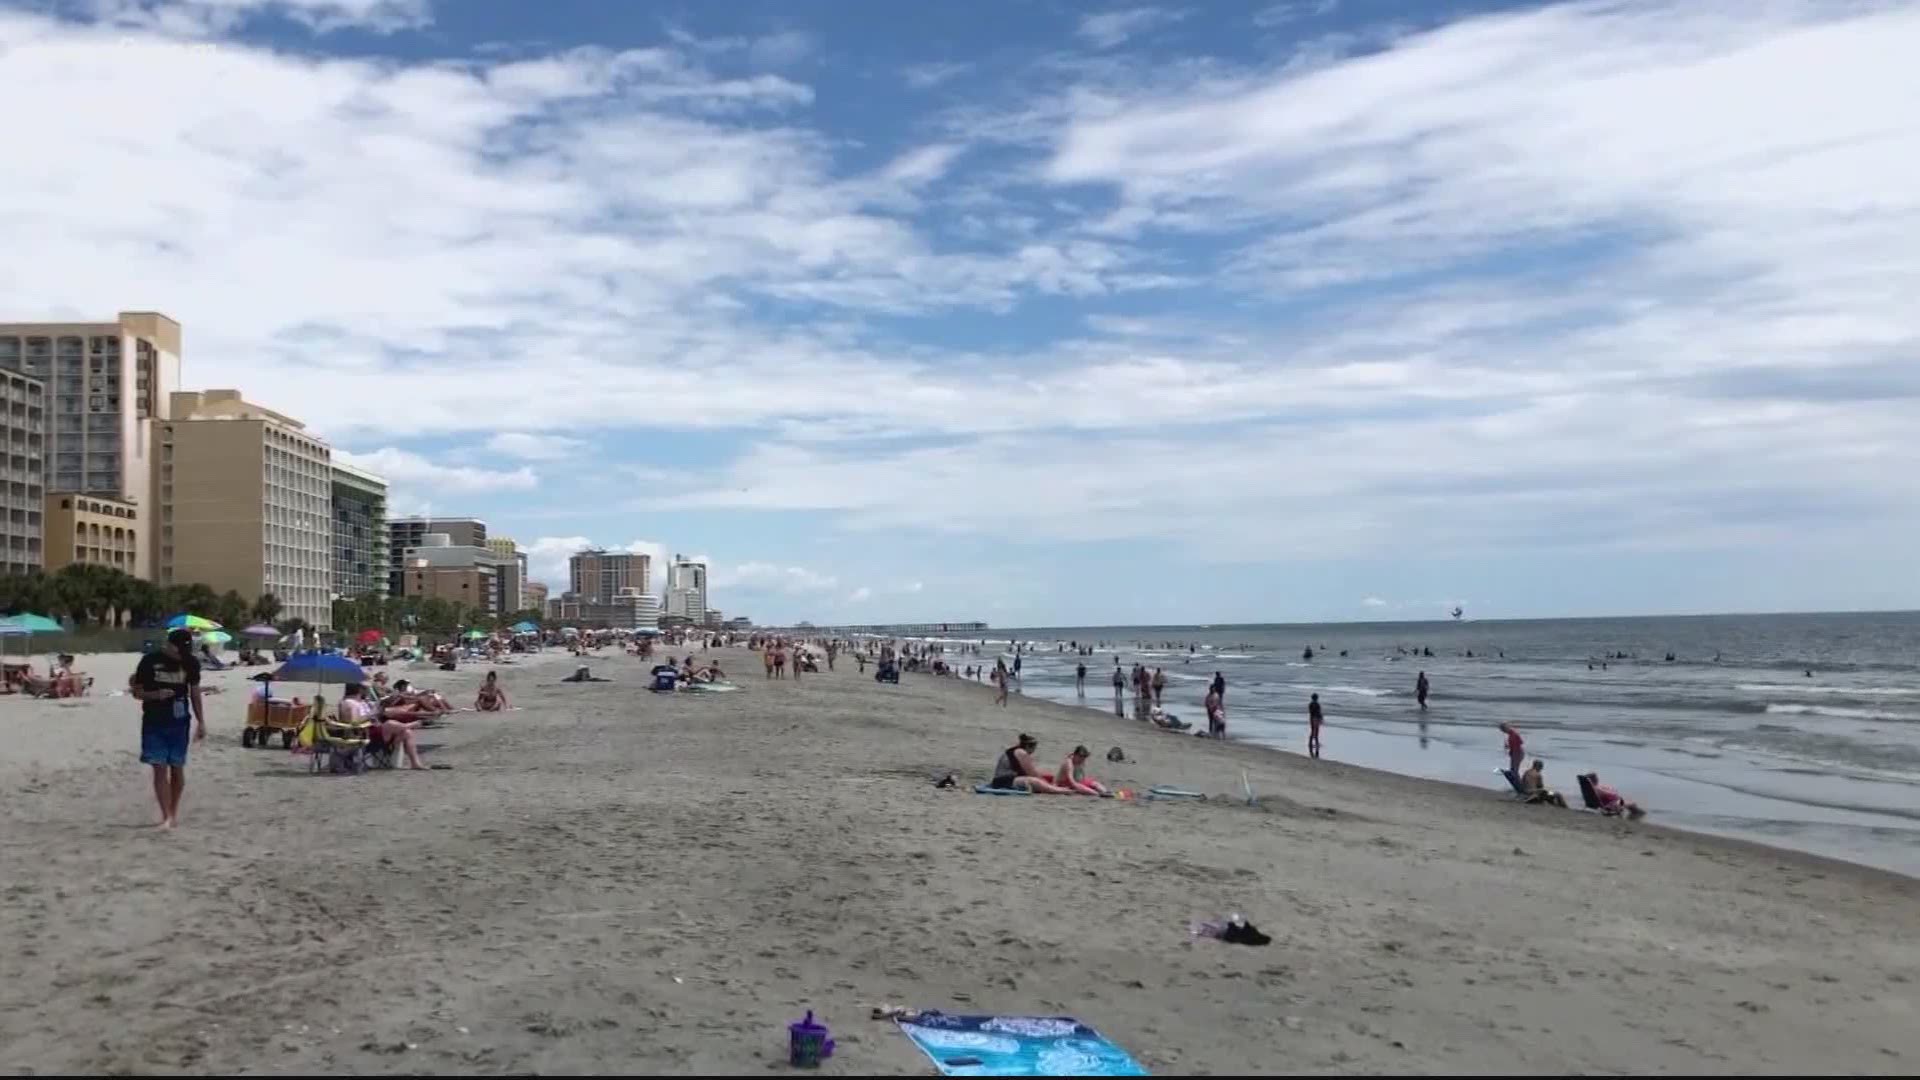 Rehoboth Beach is requiring masks everywhere in public spaces, and Deleware's governor ordered that people can't sit or stand at bars.